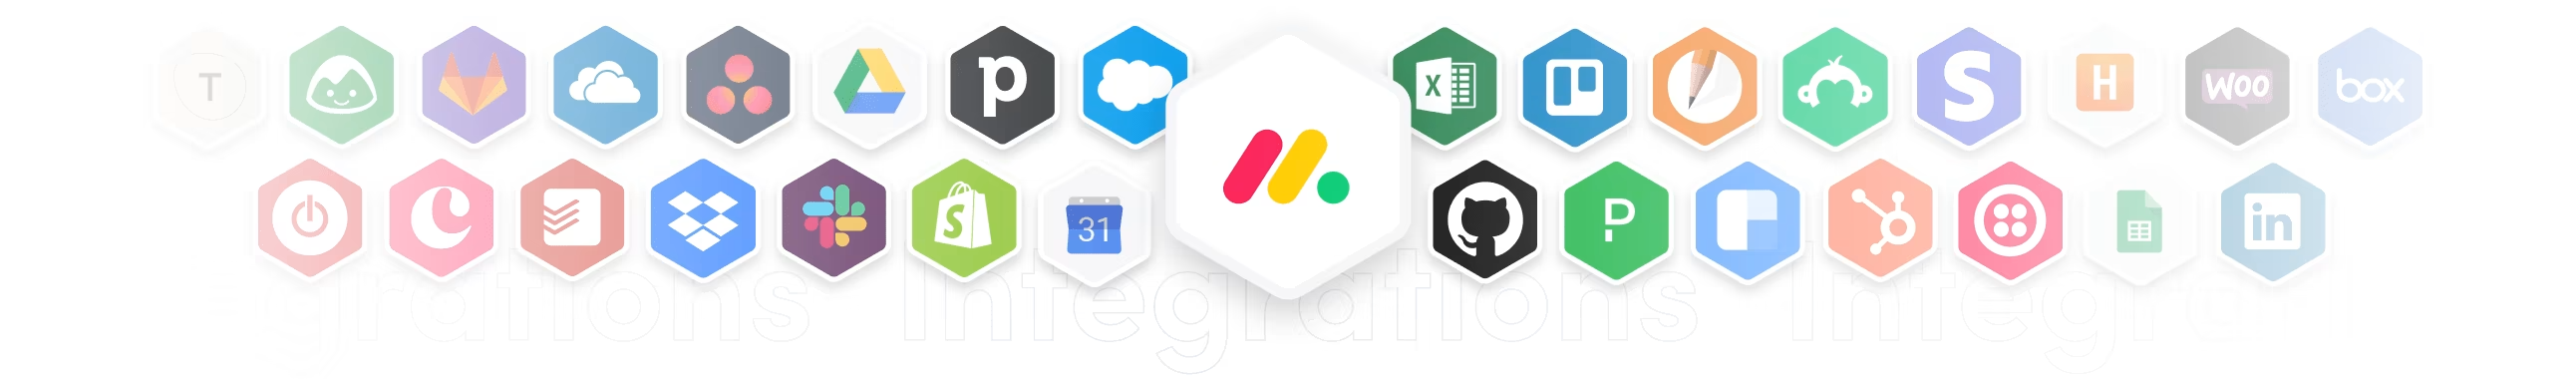 staging-mondaycomblog.kinsta.cloud integrates with 40+ different tools